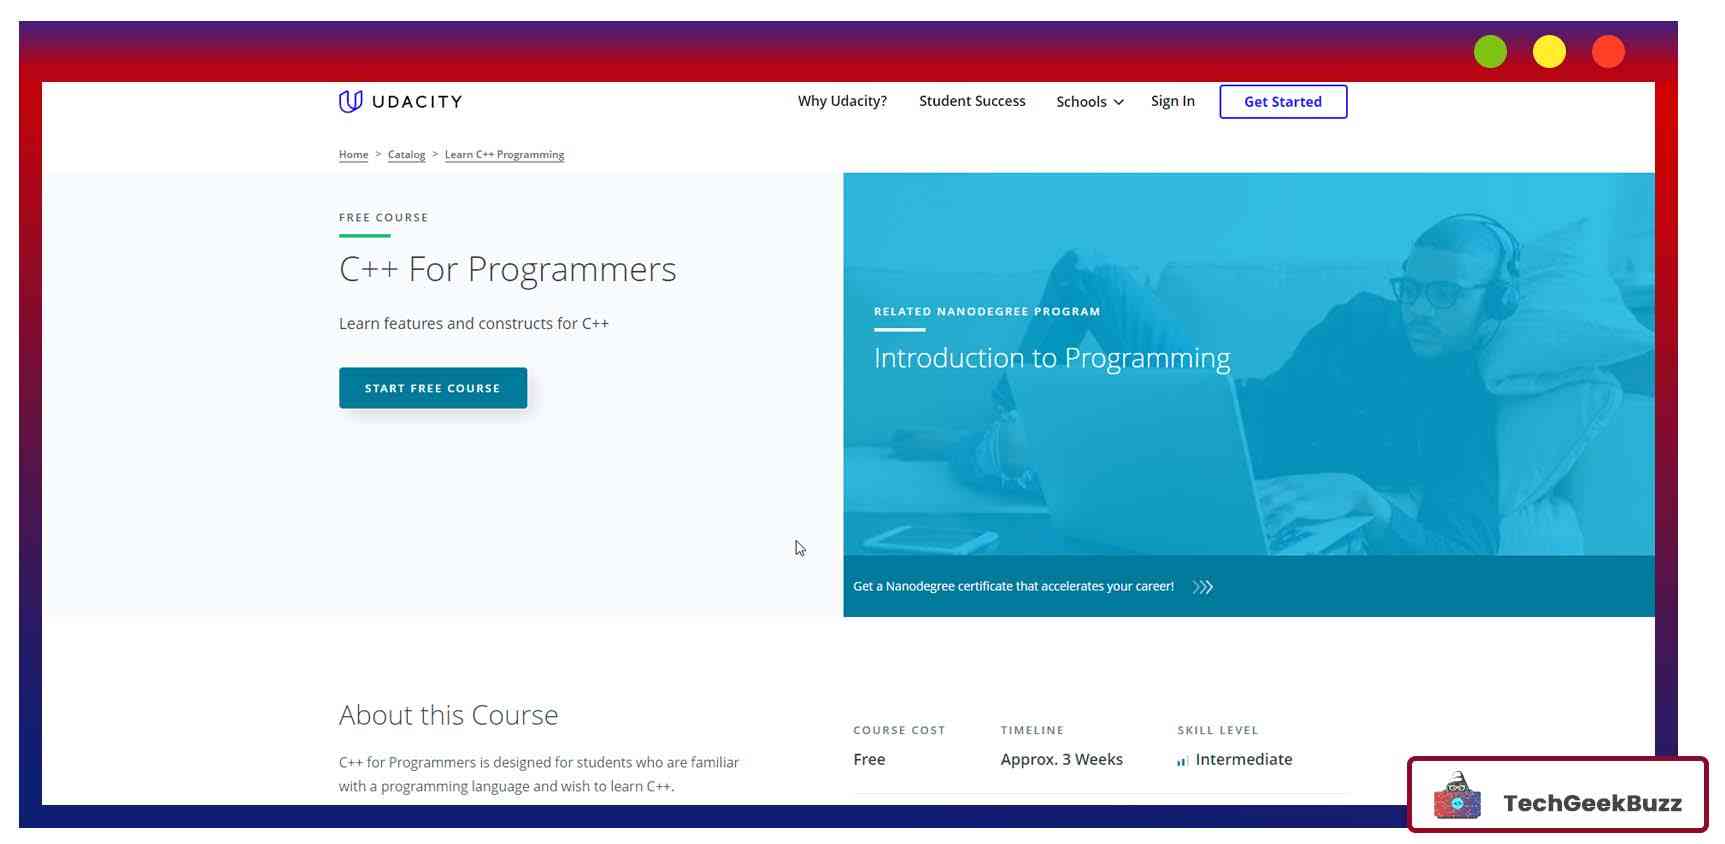 C++ Nanodegree Certification for Programmers